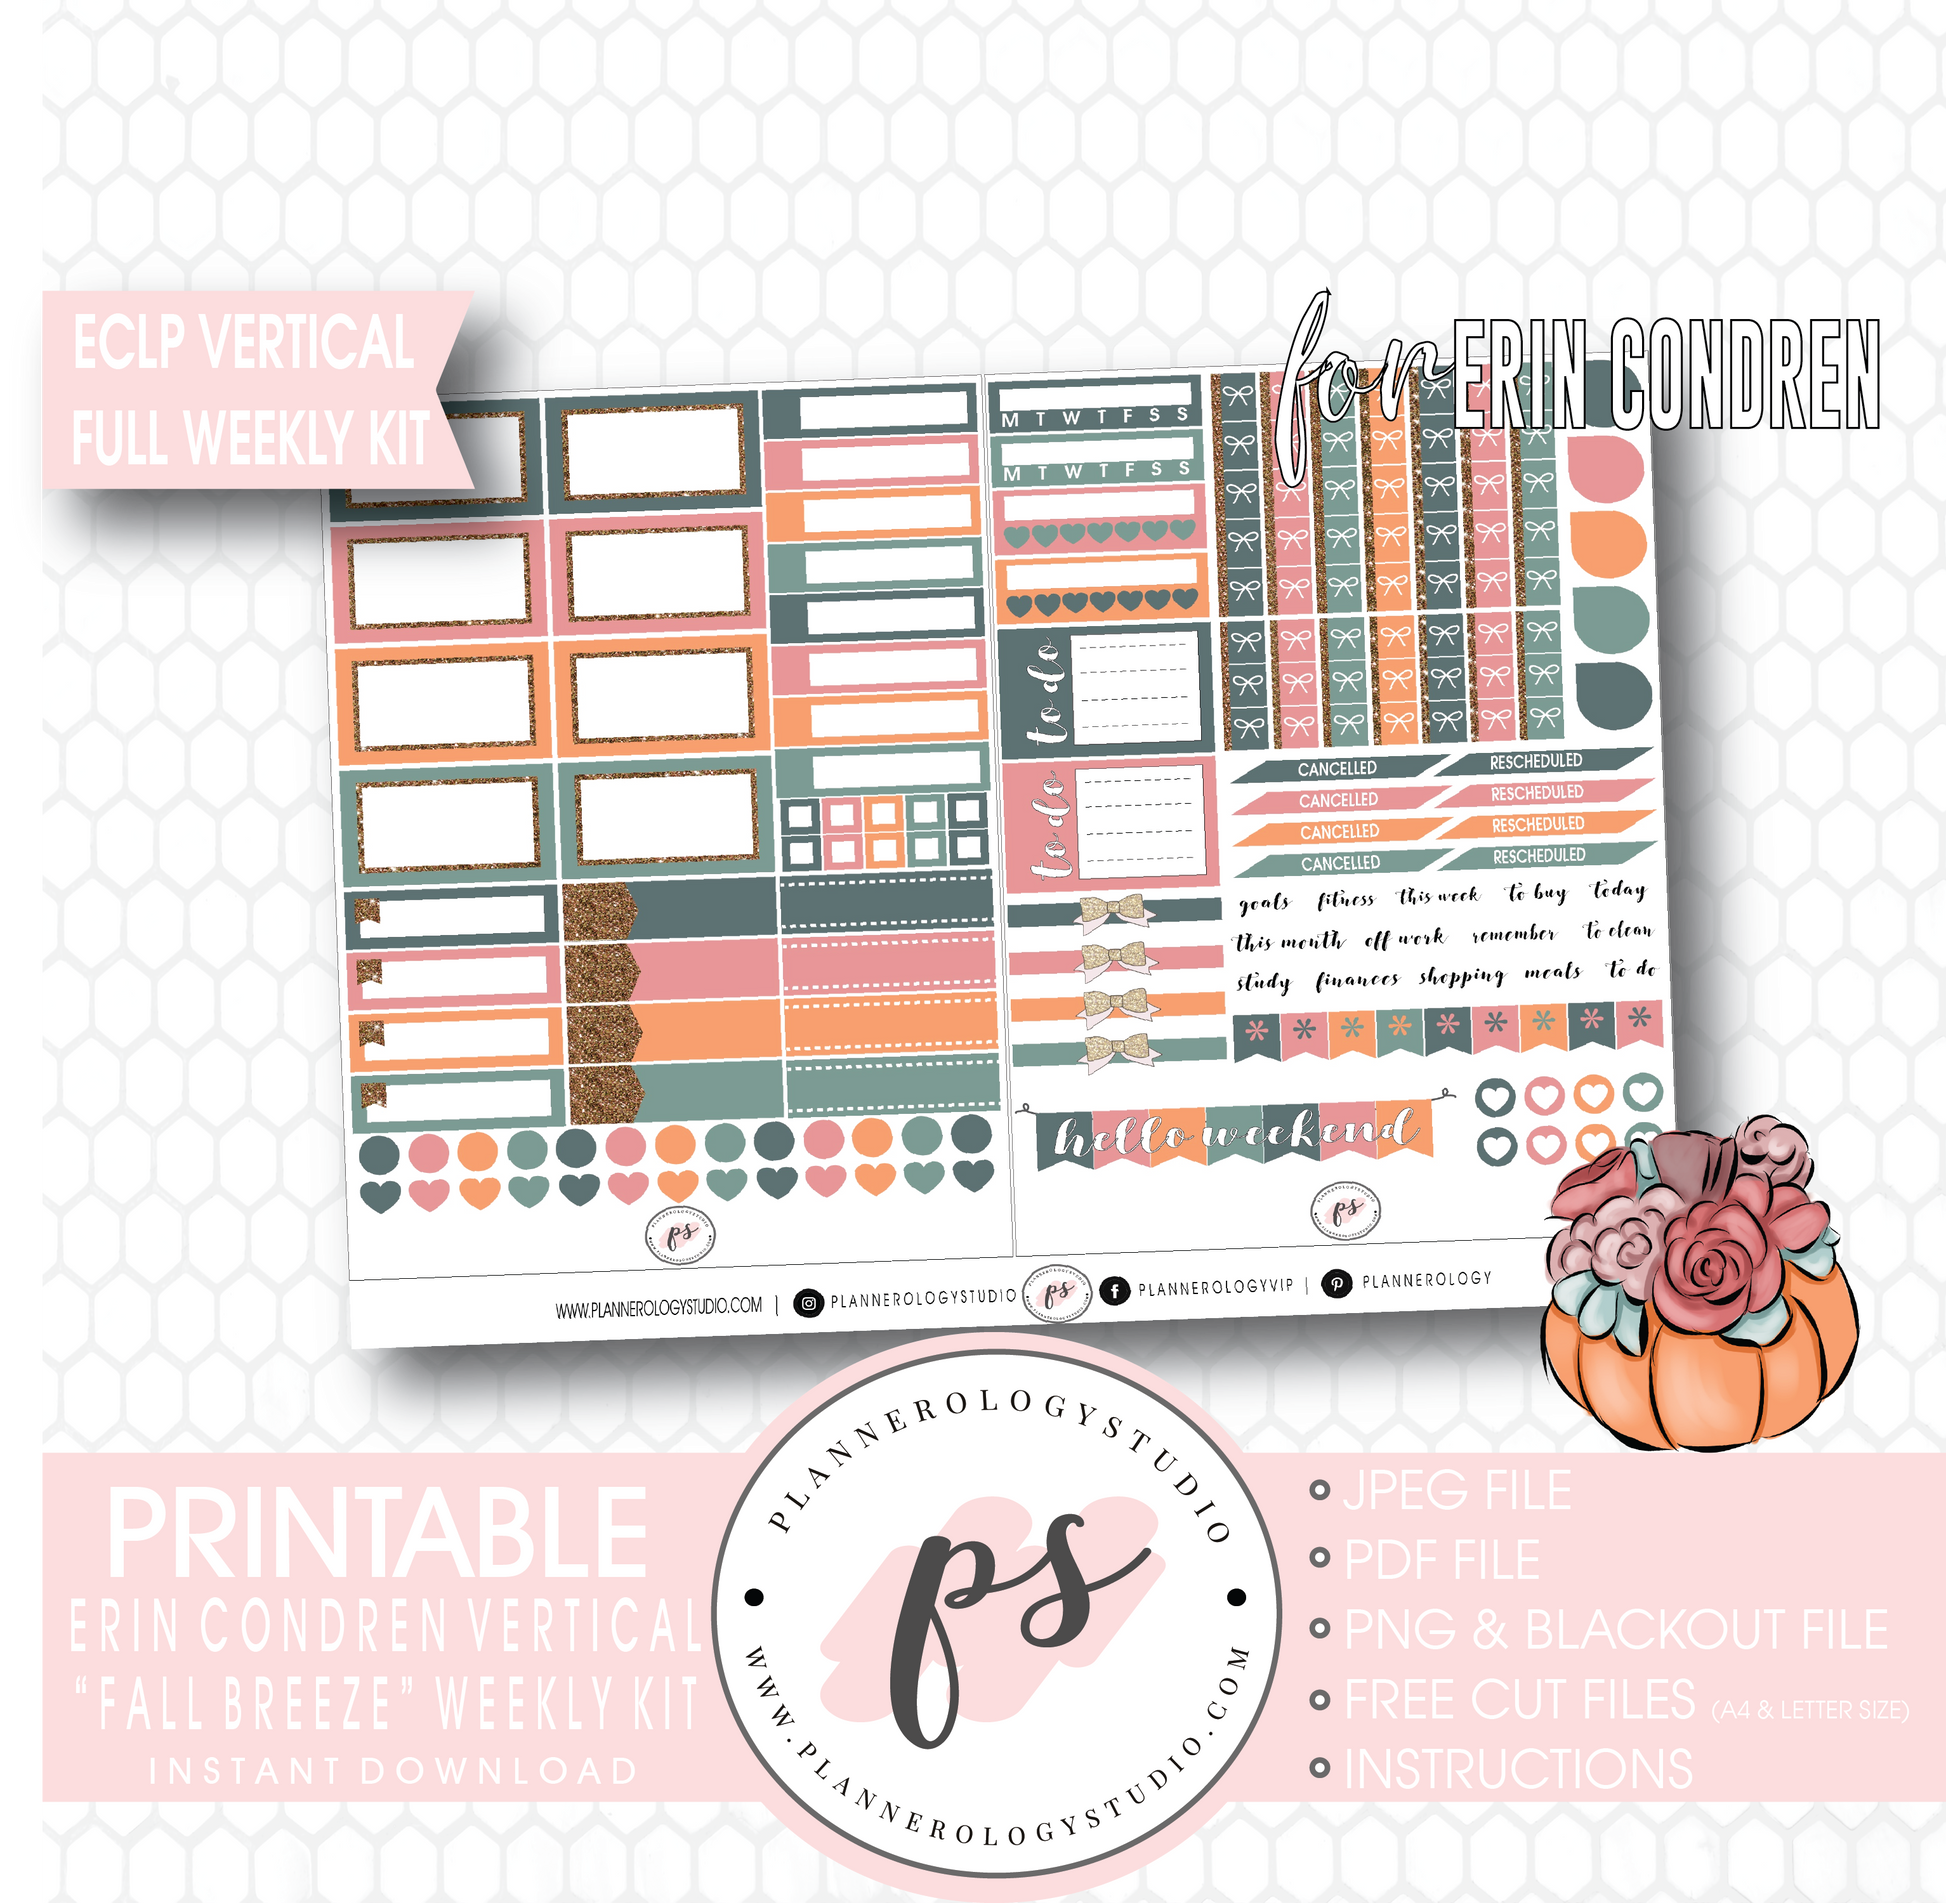 Fall Breeze Full Weekly Kit Printable Planner Digital Stickers (for use with Erin Condren Vertical) - Plannerologystudio